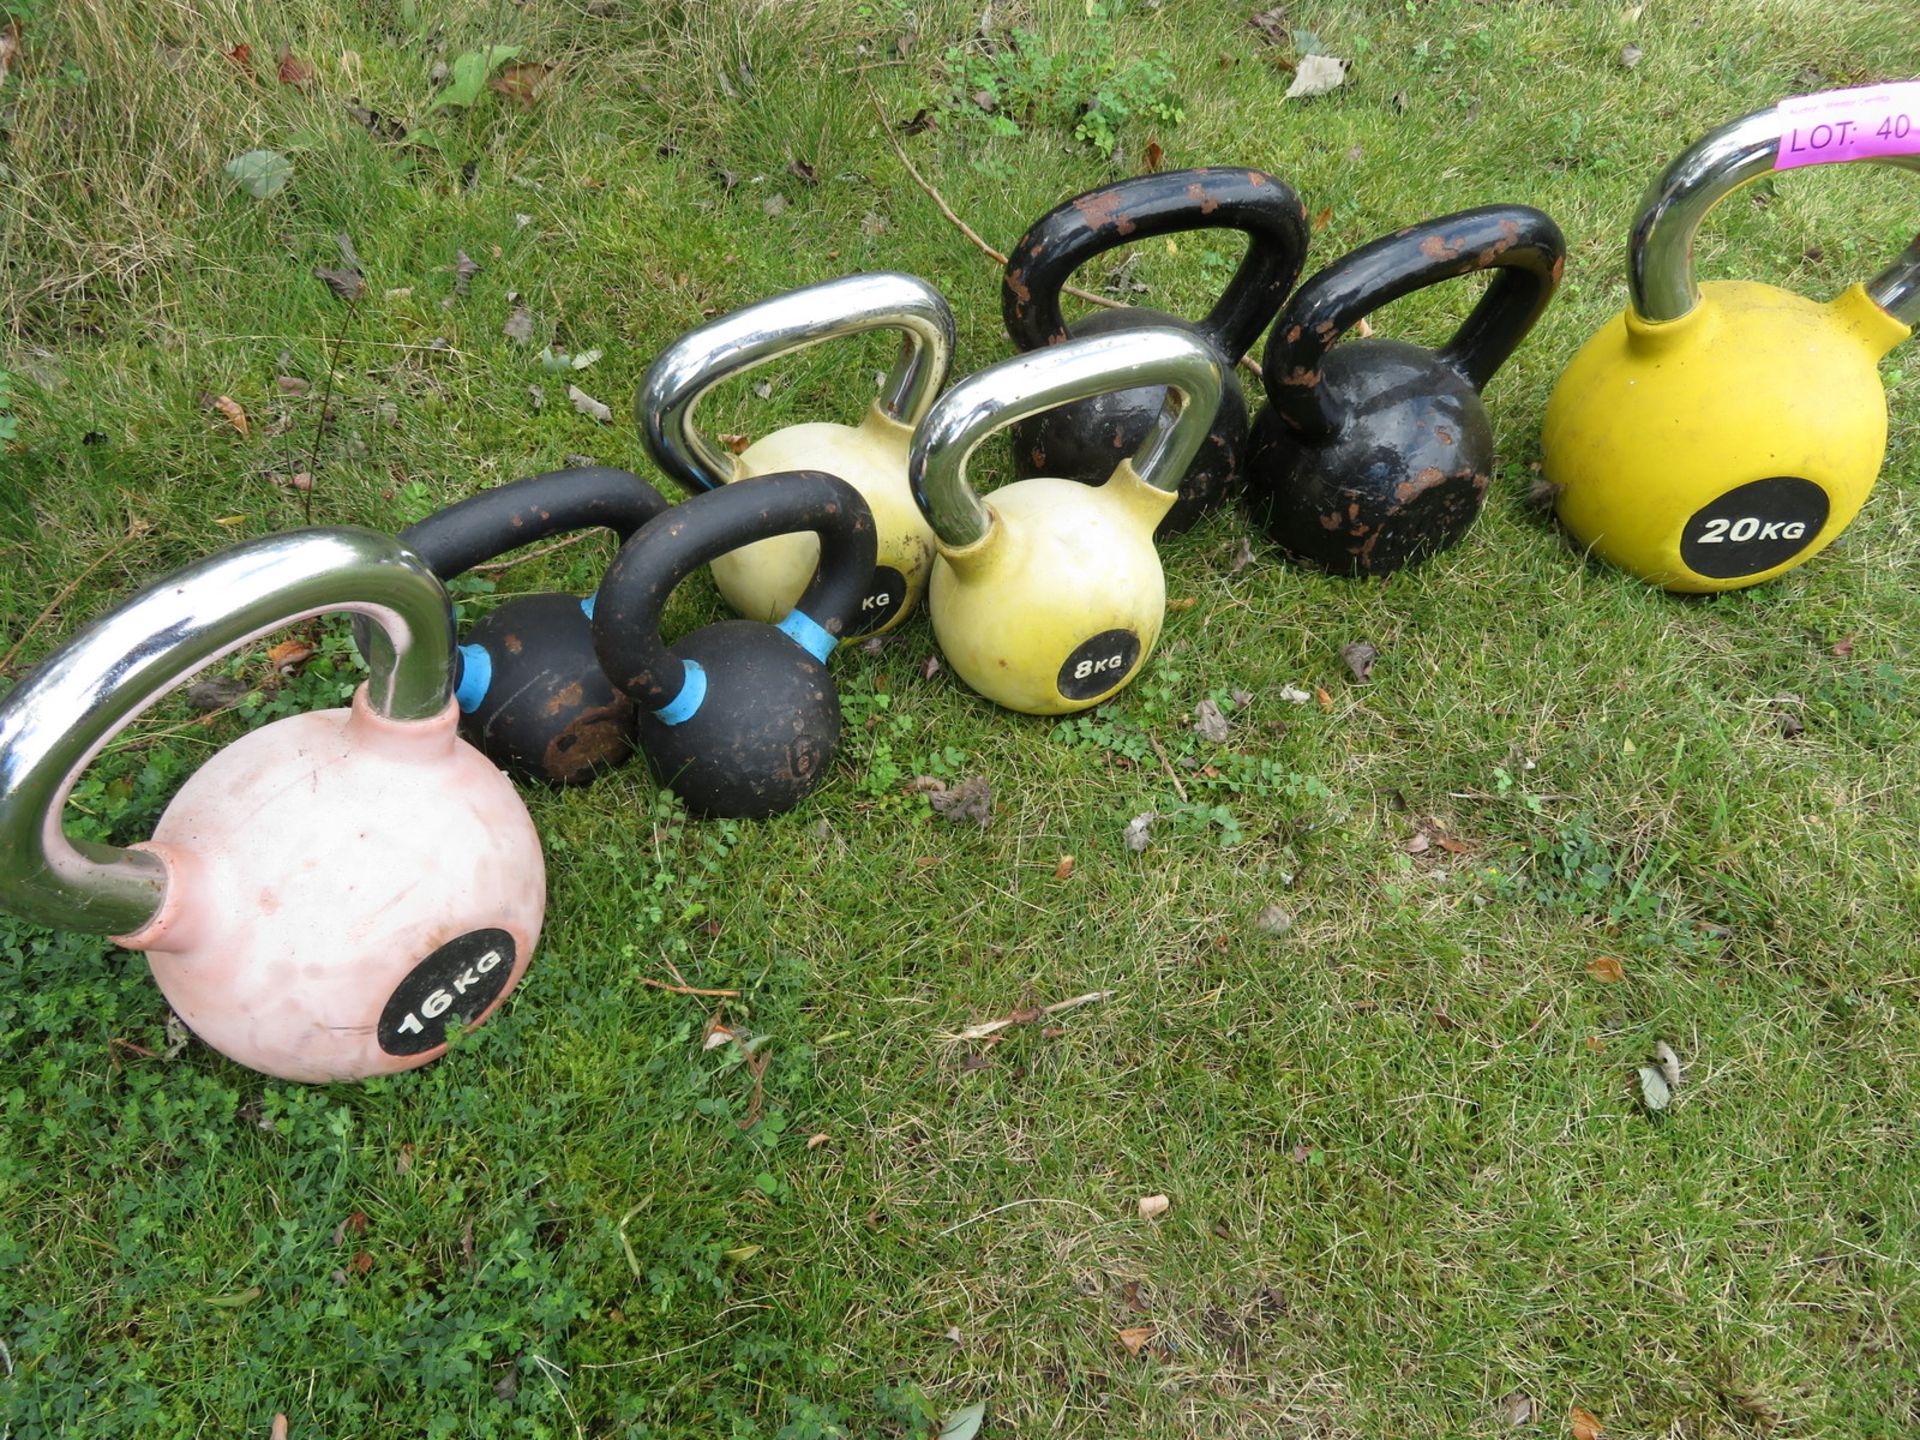 8 Kettle Bells Sizes Range From 6kg - 20kg Weights Included: 2x 6kg, 2x 8kg, 2x 14kg, 1x 1 - Image 3 of 3